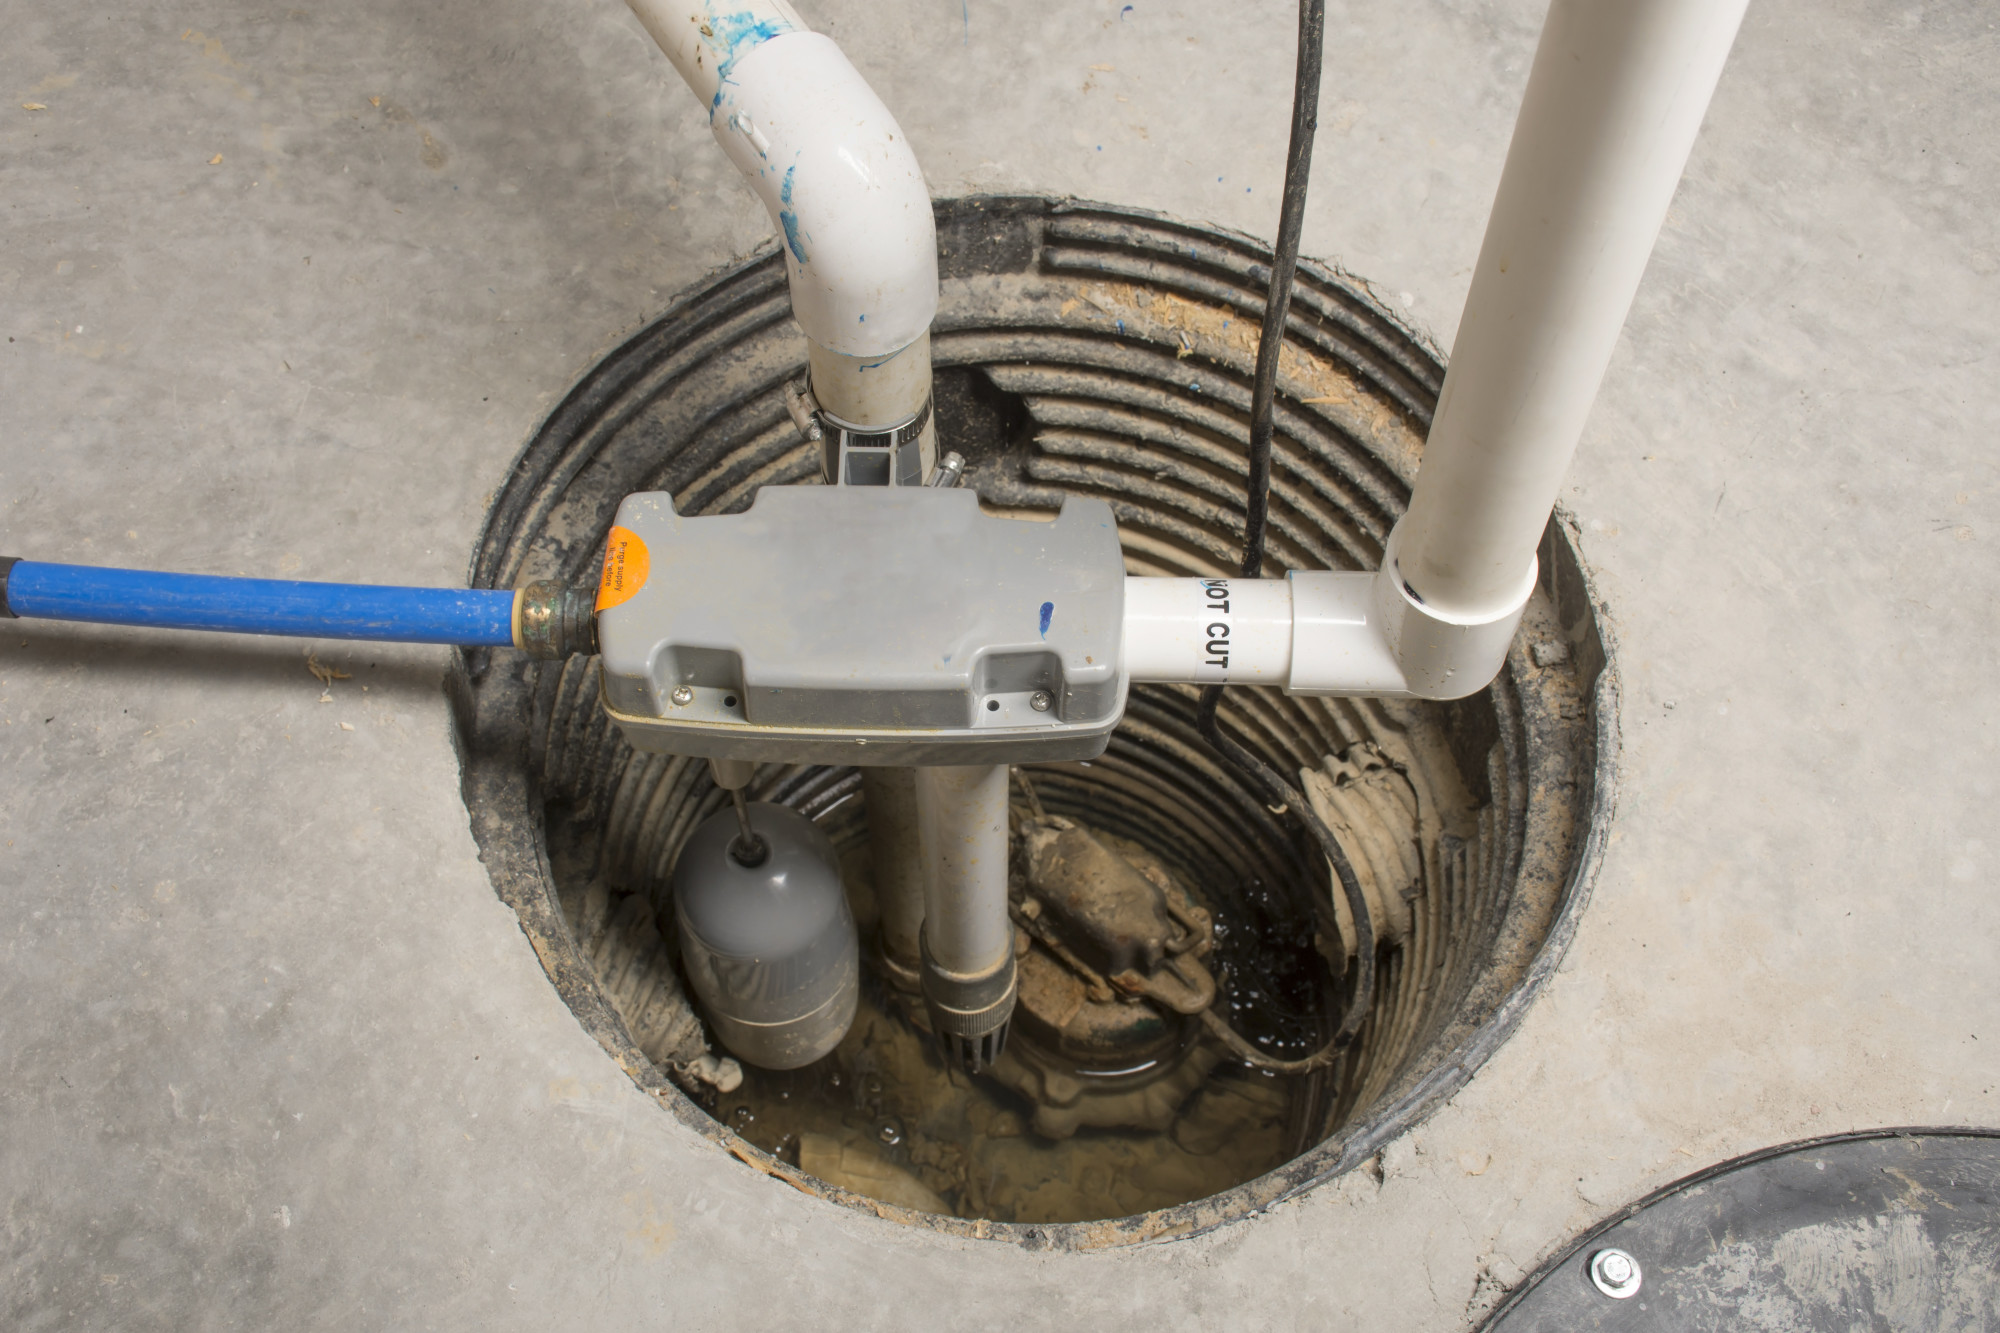 Drain or Sump Pump Installed in Basements or Crawlspaces